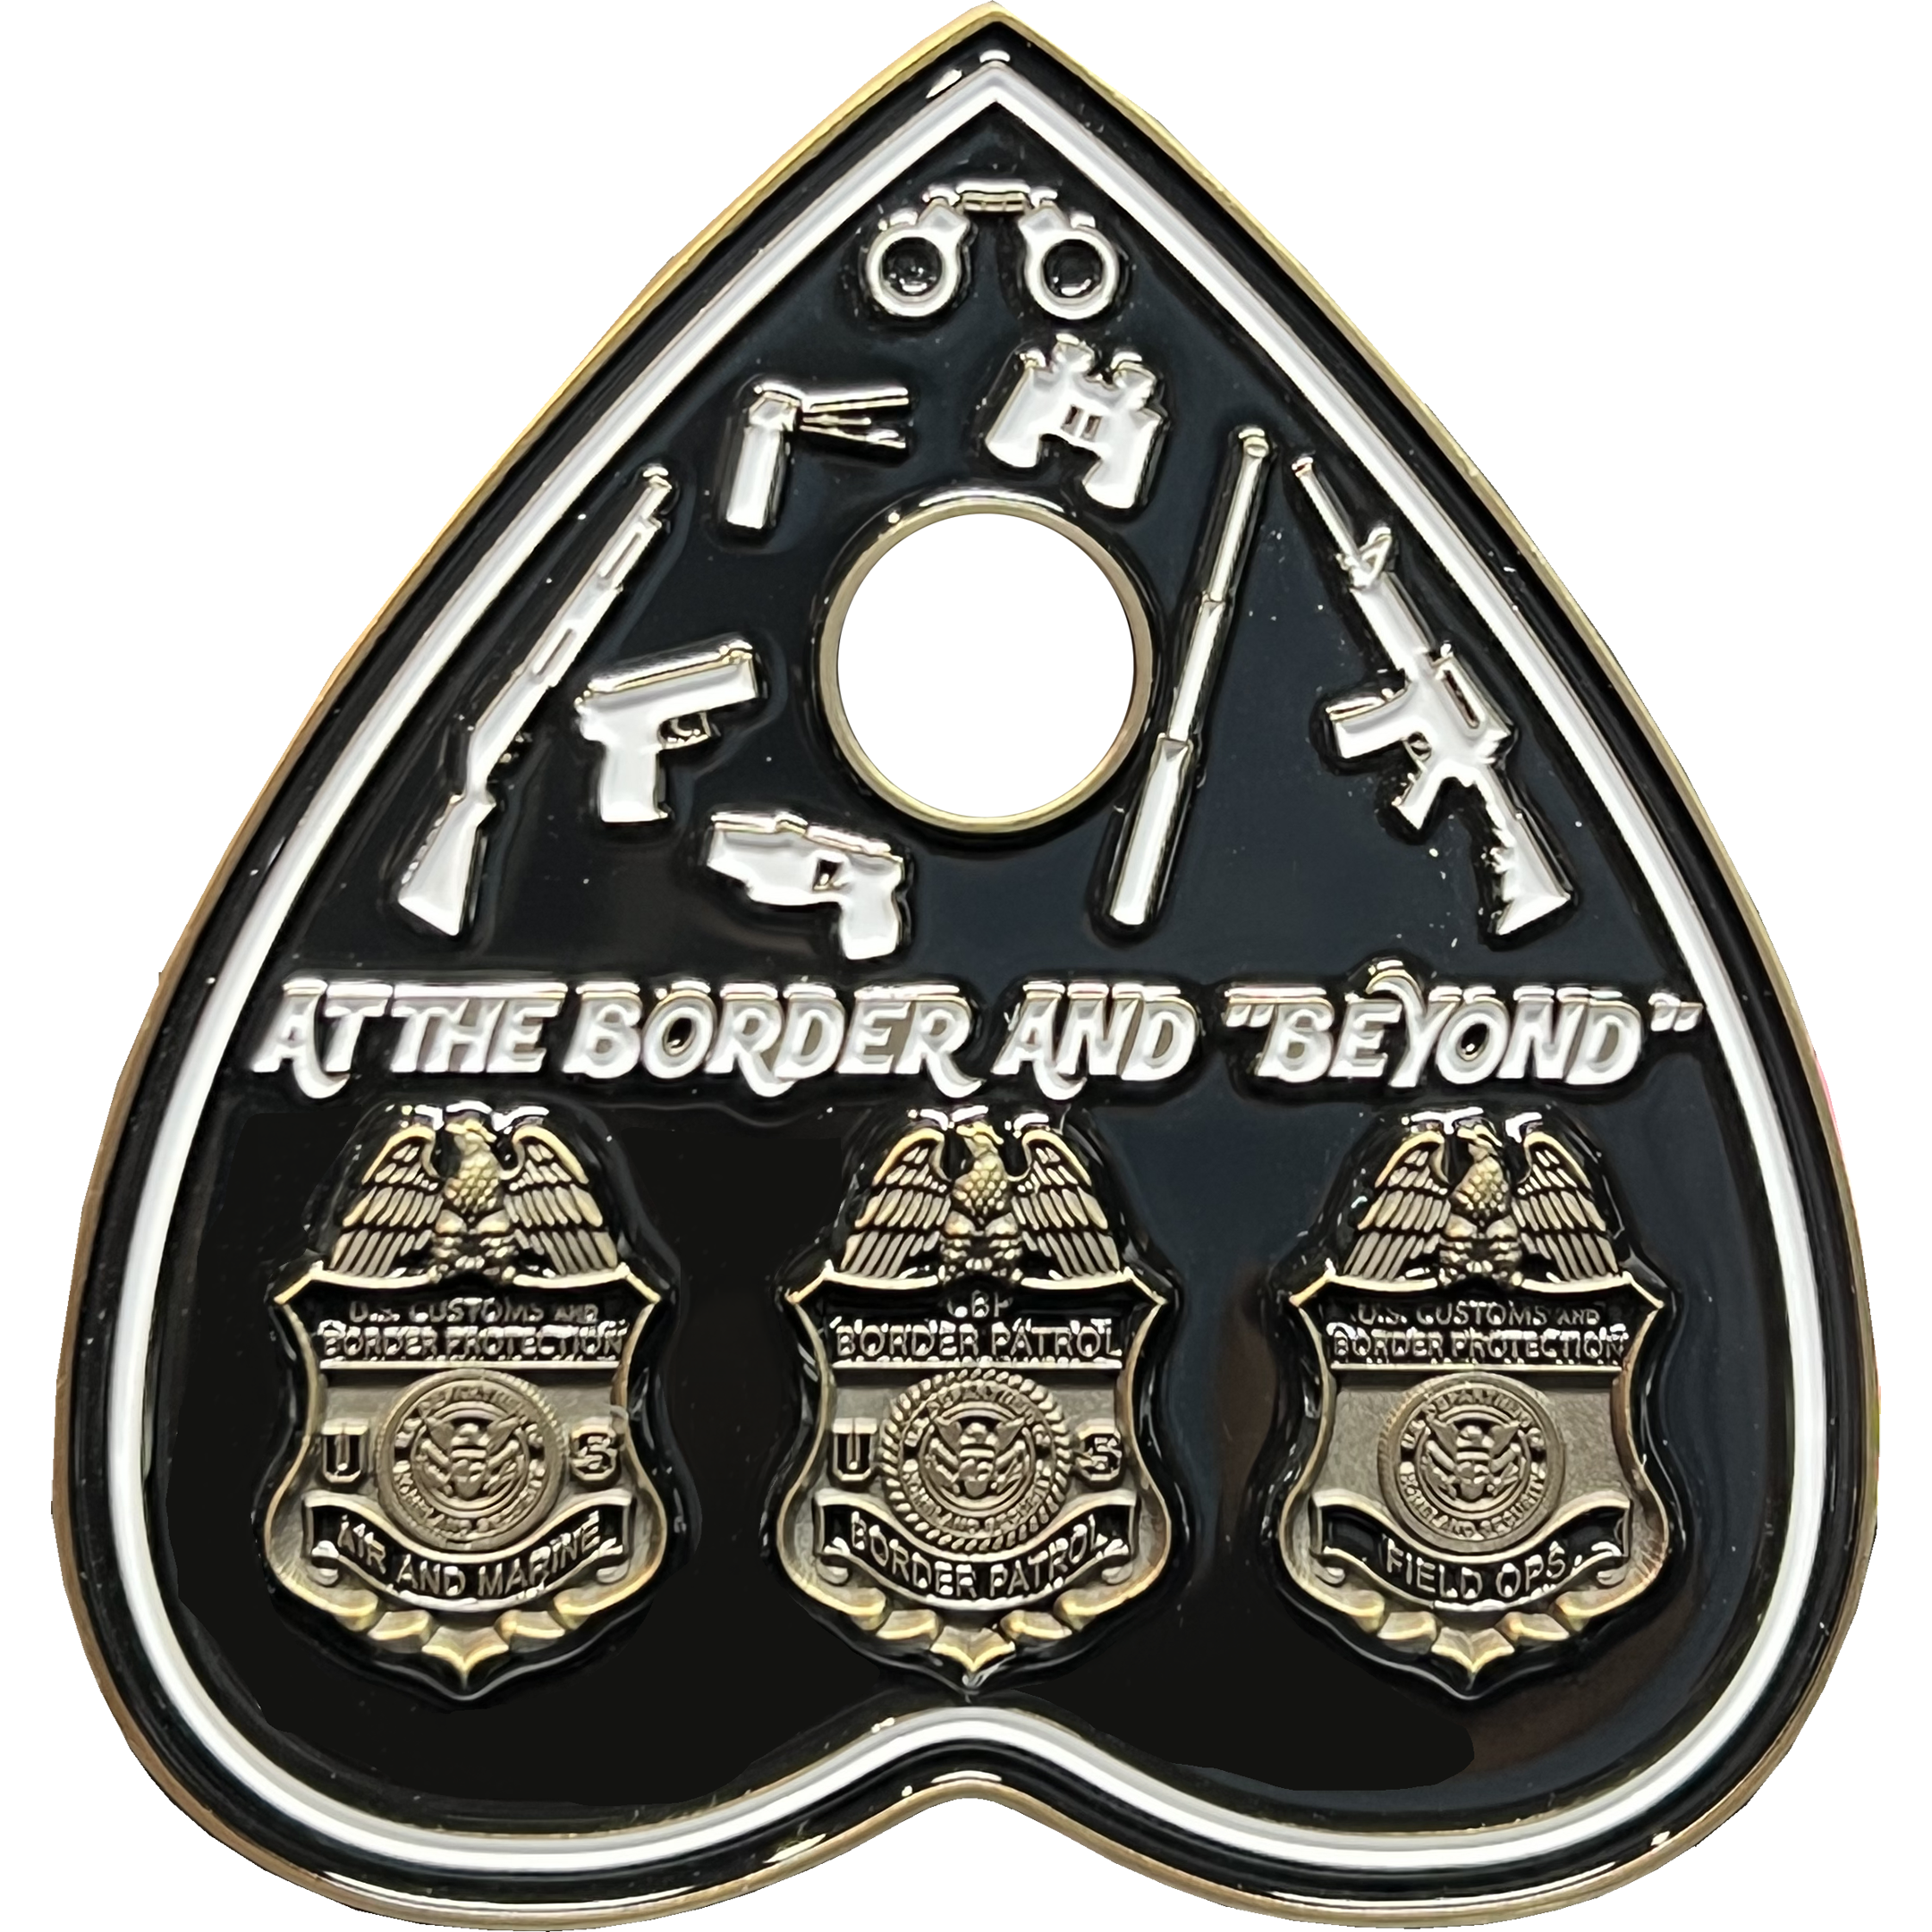 discontinued BL17-019 CBP Challenge Coin Border Patrol, Field Operations, Air and Marine paranormal Ouija inspired